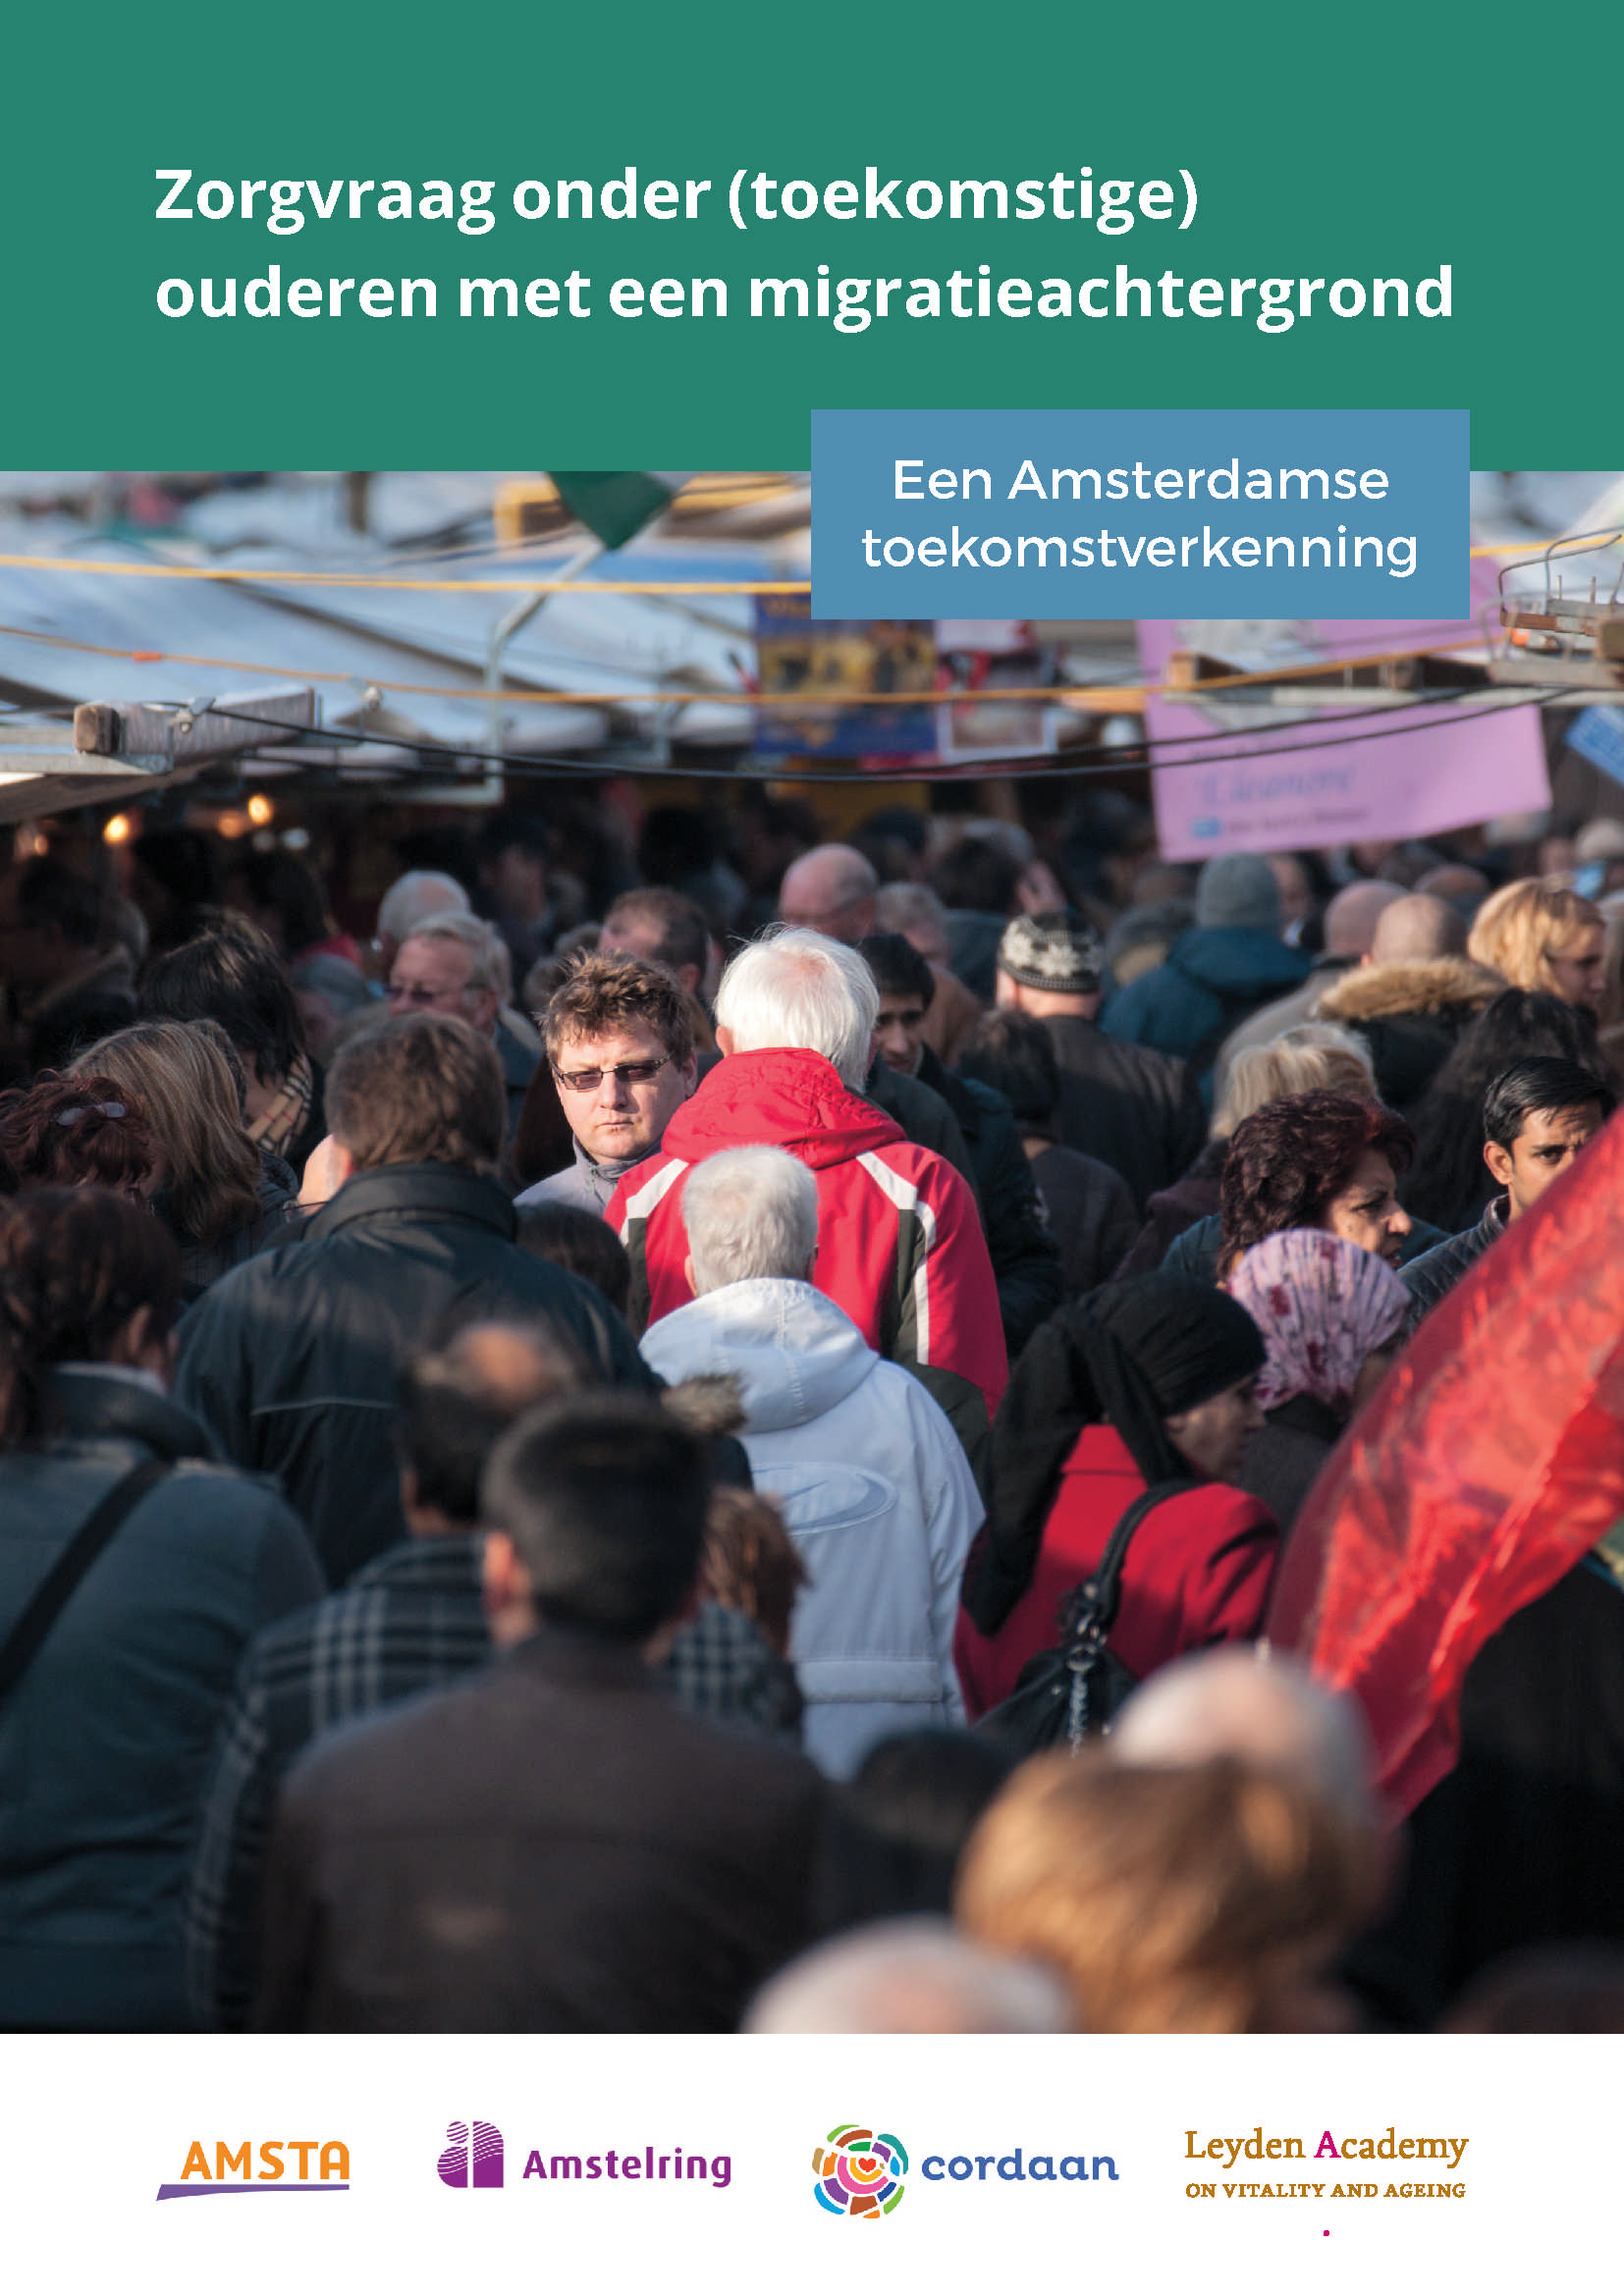 Care for elderly people with a migration background in Amsterdam: A future perspective